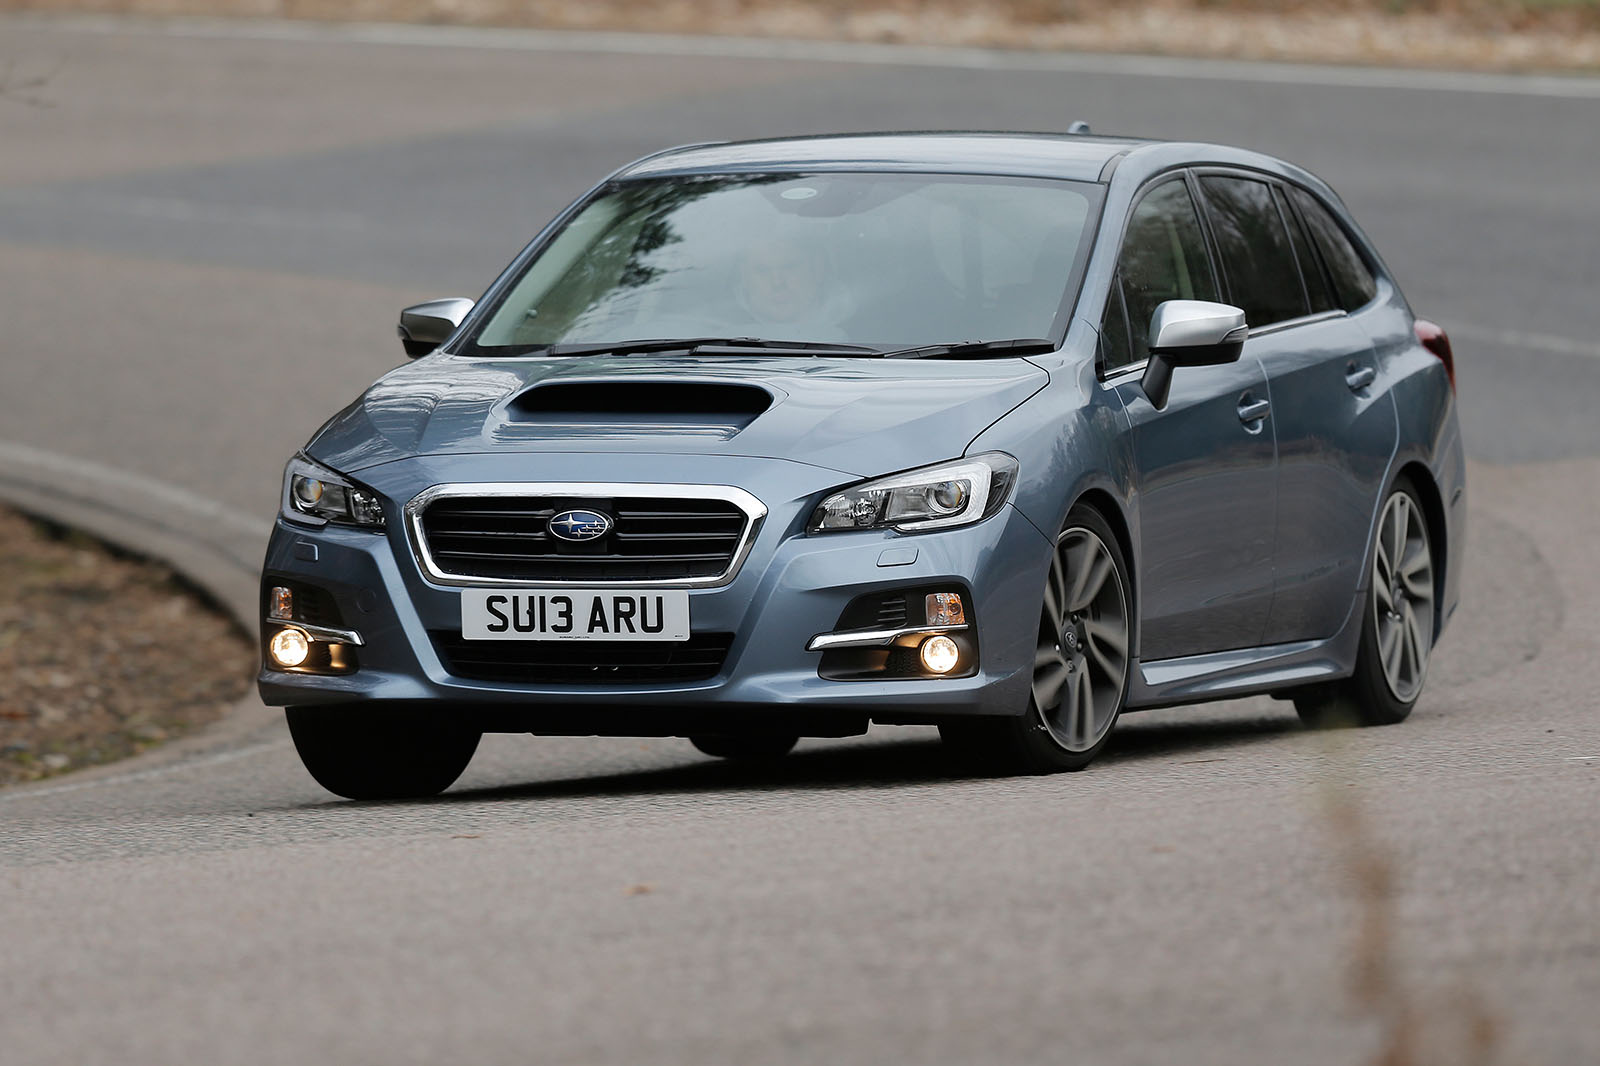 The Subaru Levorg's ride can be brittle at times...